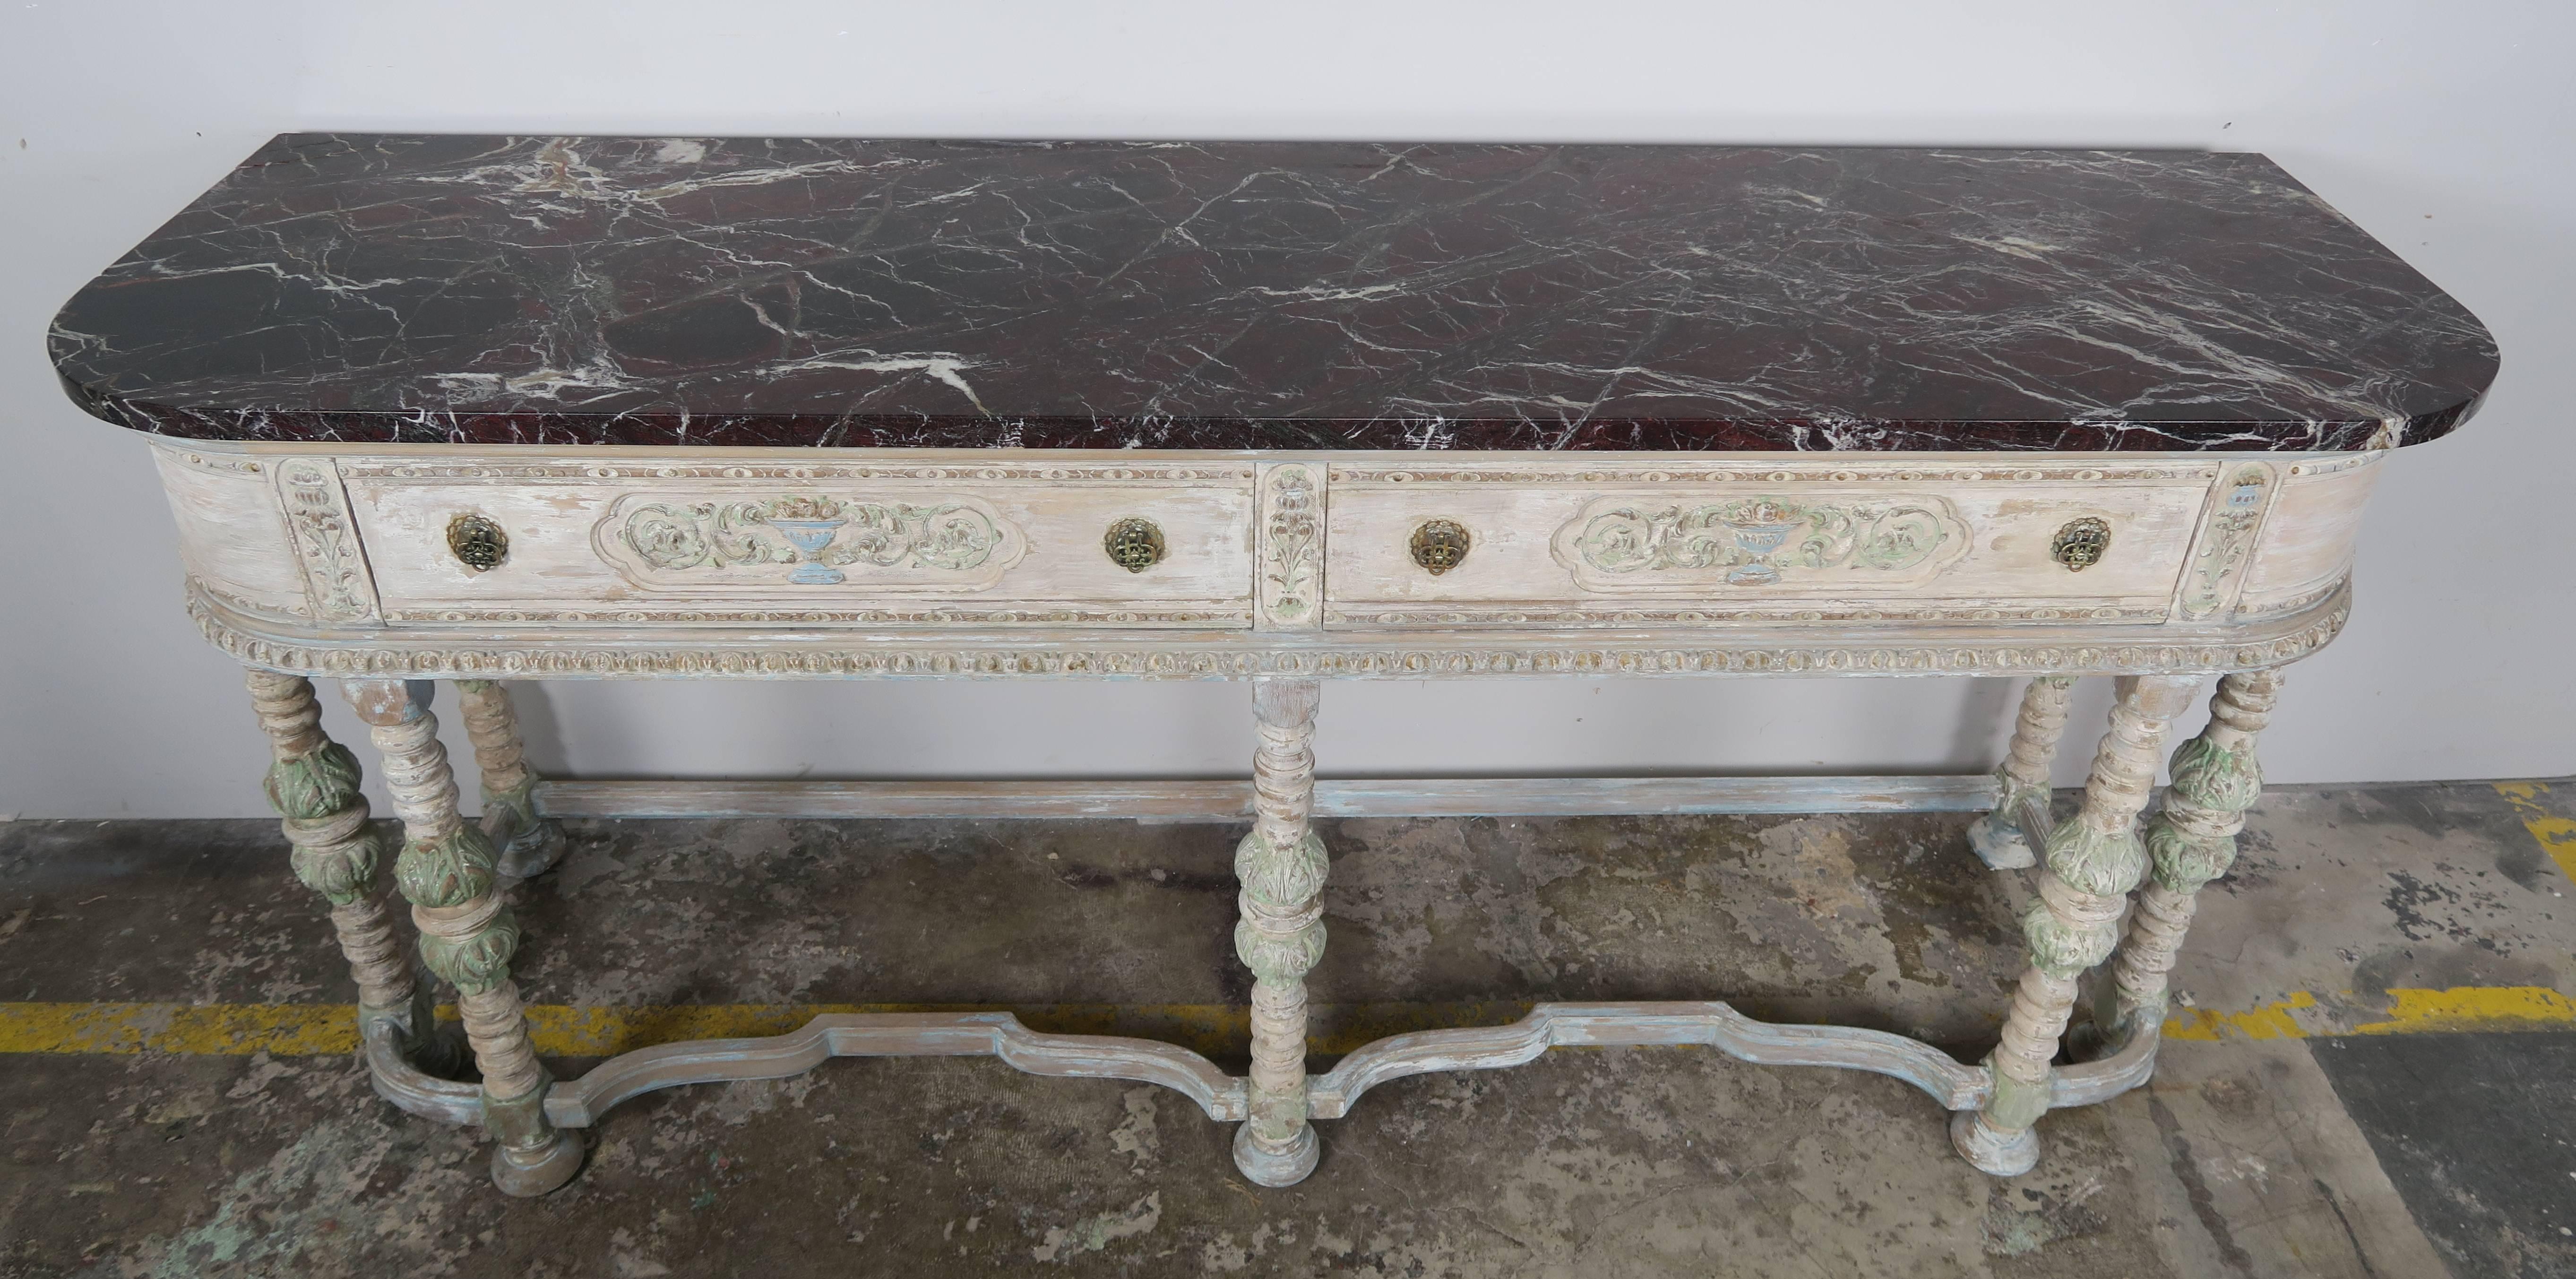 Louis XVI style French painted sideboard with two large drawers and original brown marble top with white veins. The carved wood sideboard stands on seven straight legs with carved acanthus leaves and bun feet. The legs are attached by bottom